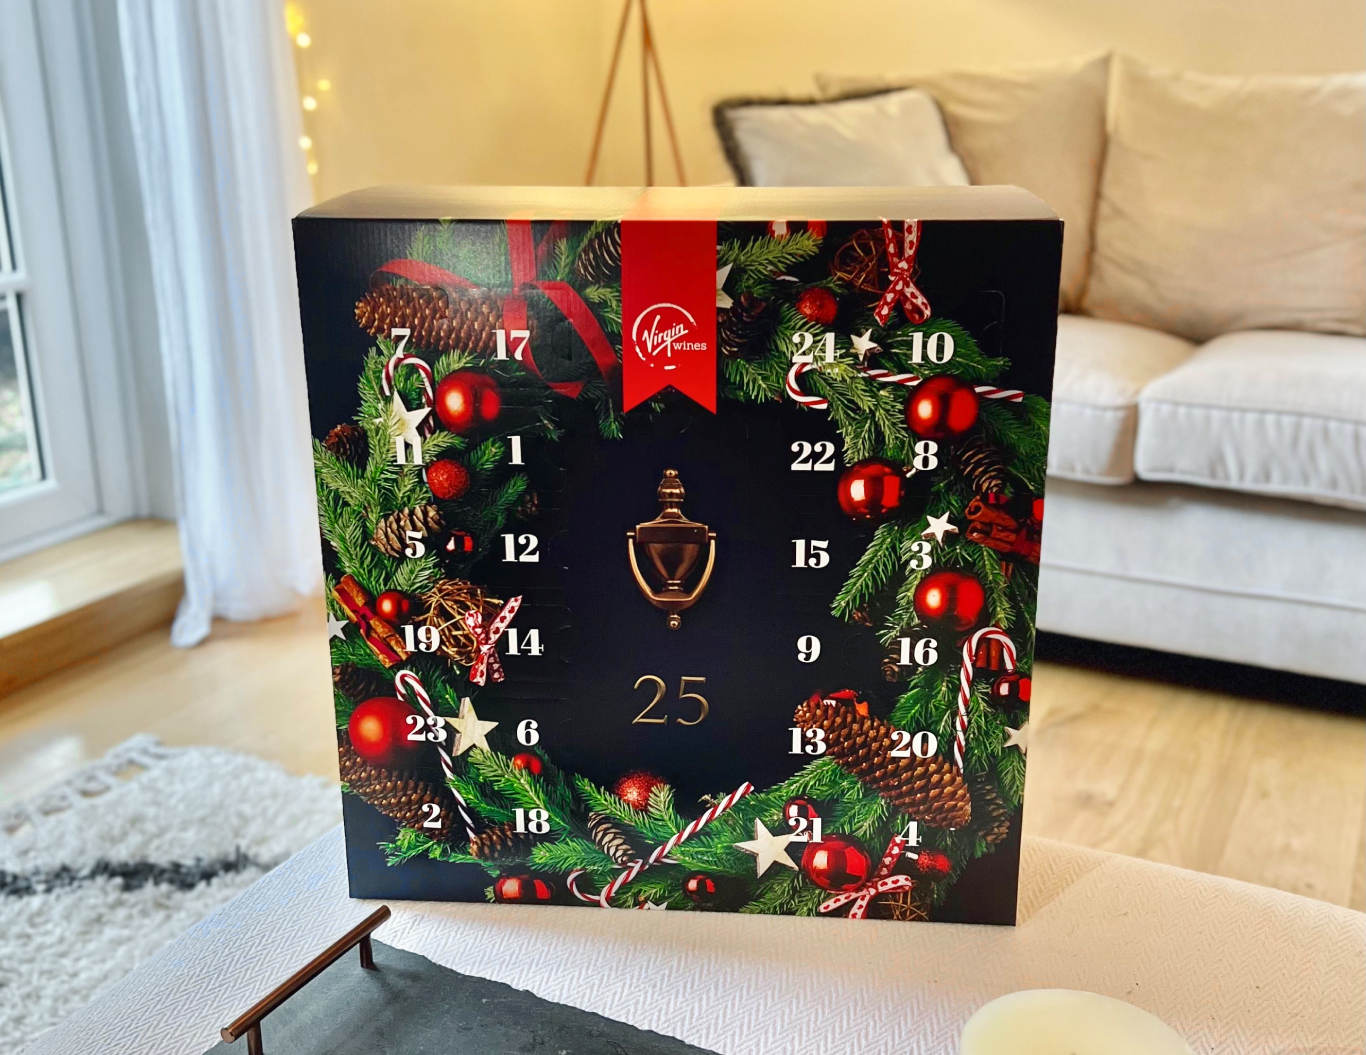 Wine Advent Calendar by Virgin Wines in a living room